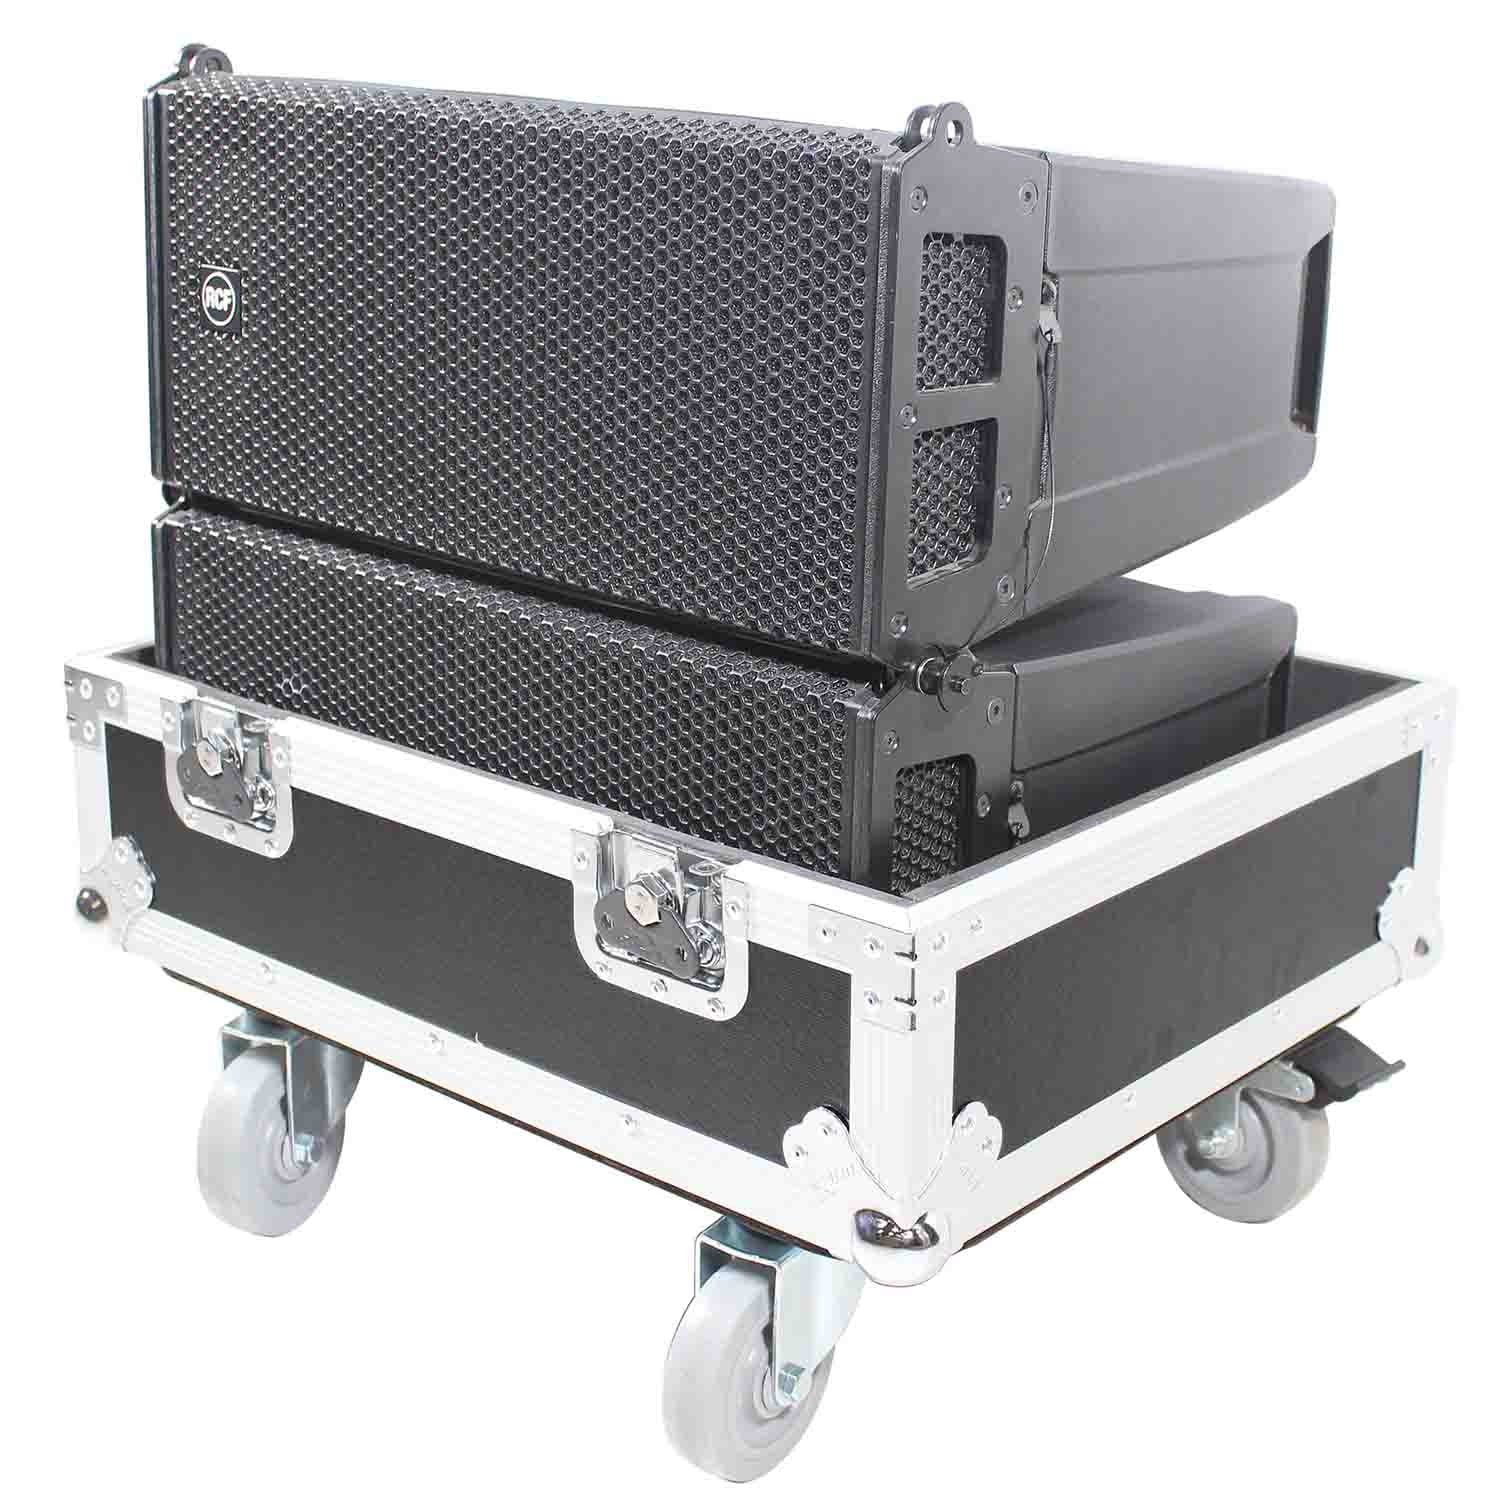 B-Stock: ProX X-RCF-HDL6ALAX2W, Line Array Flight Case for 2 RCF HDL6-A HDL26-A Speakers with Wheels ProX Cases